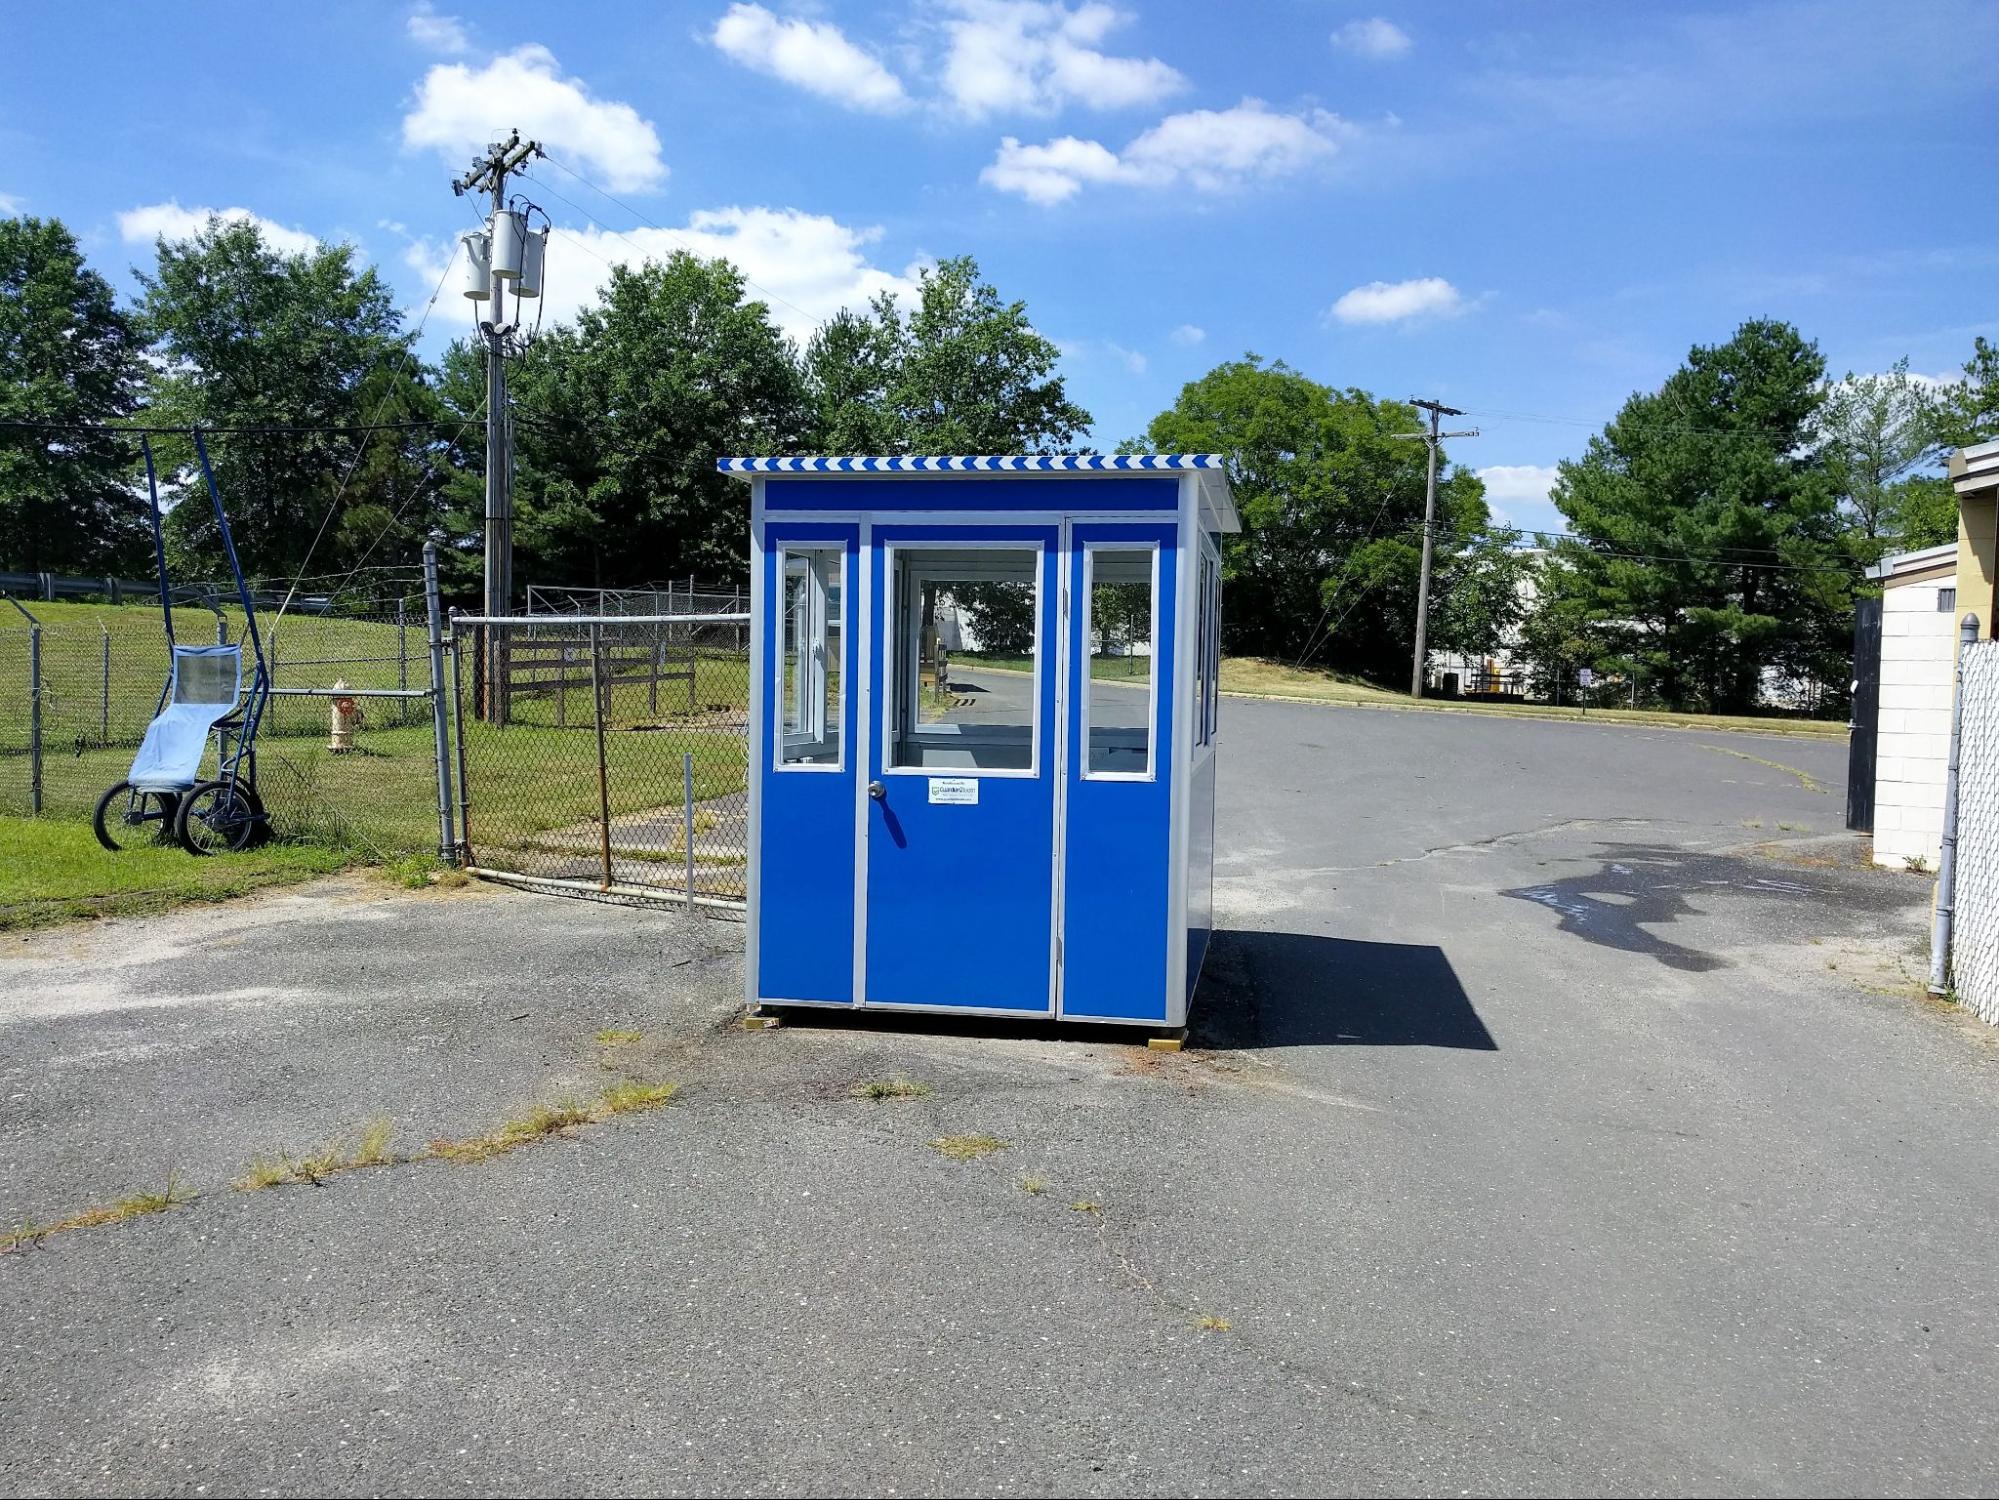 improving campus security with guard booths